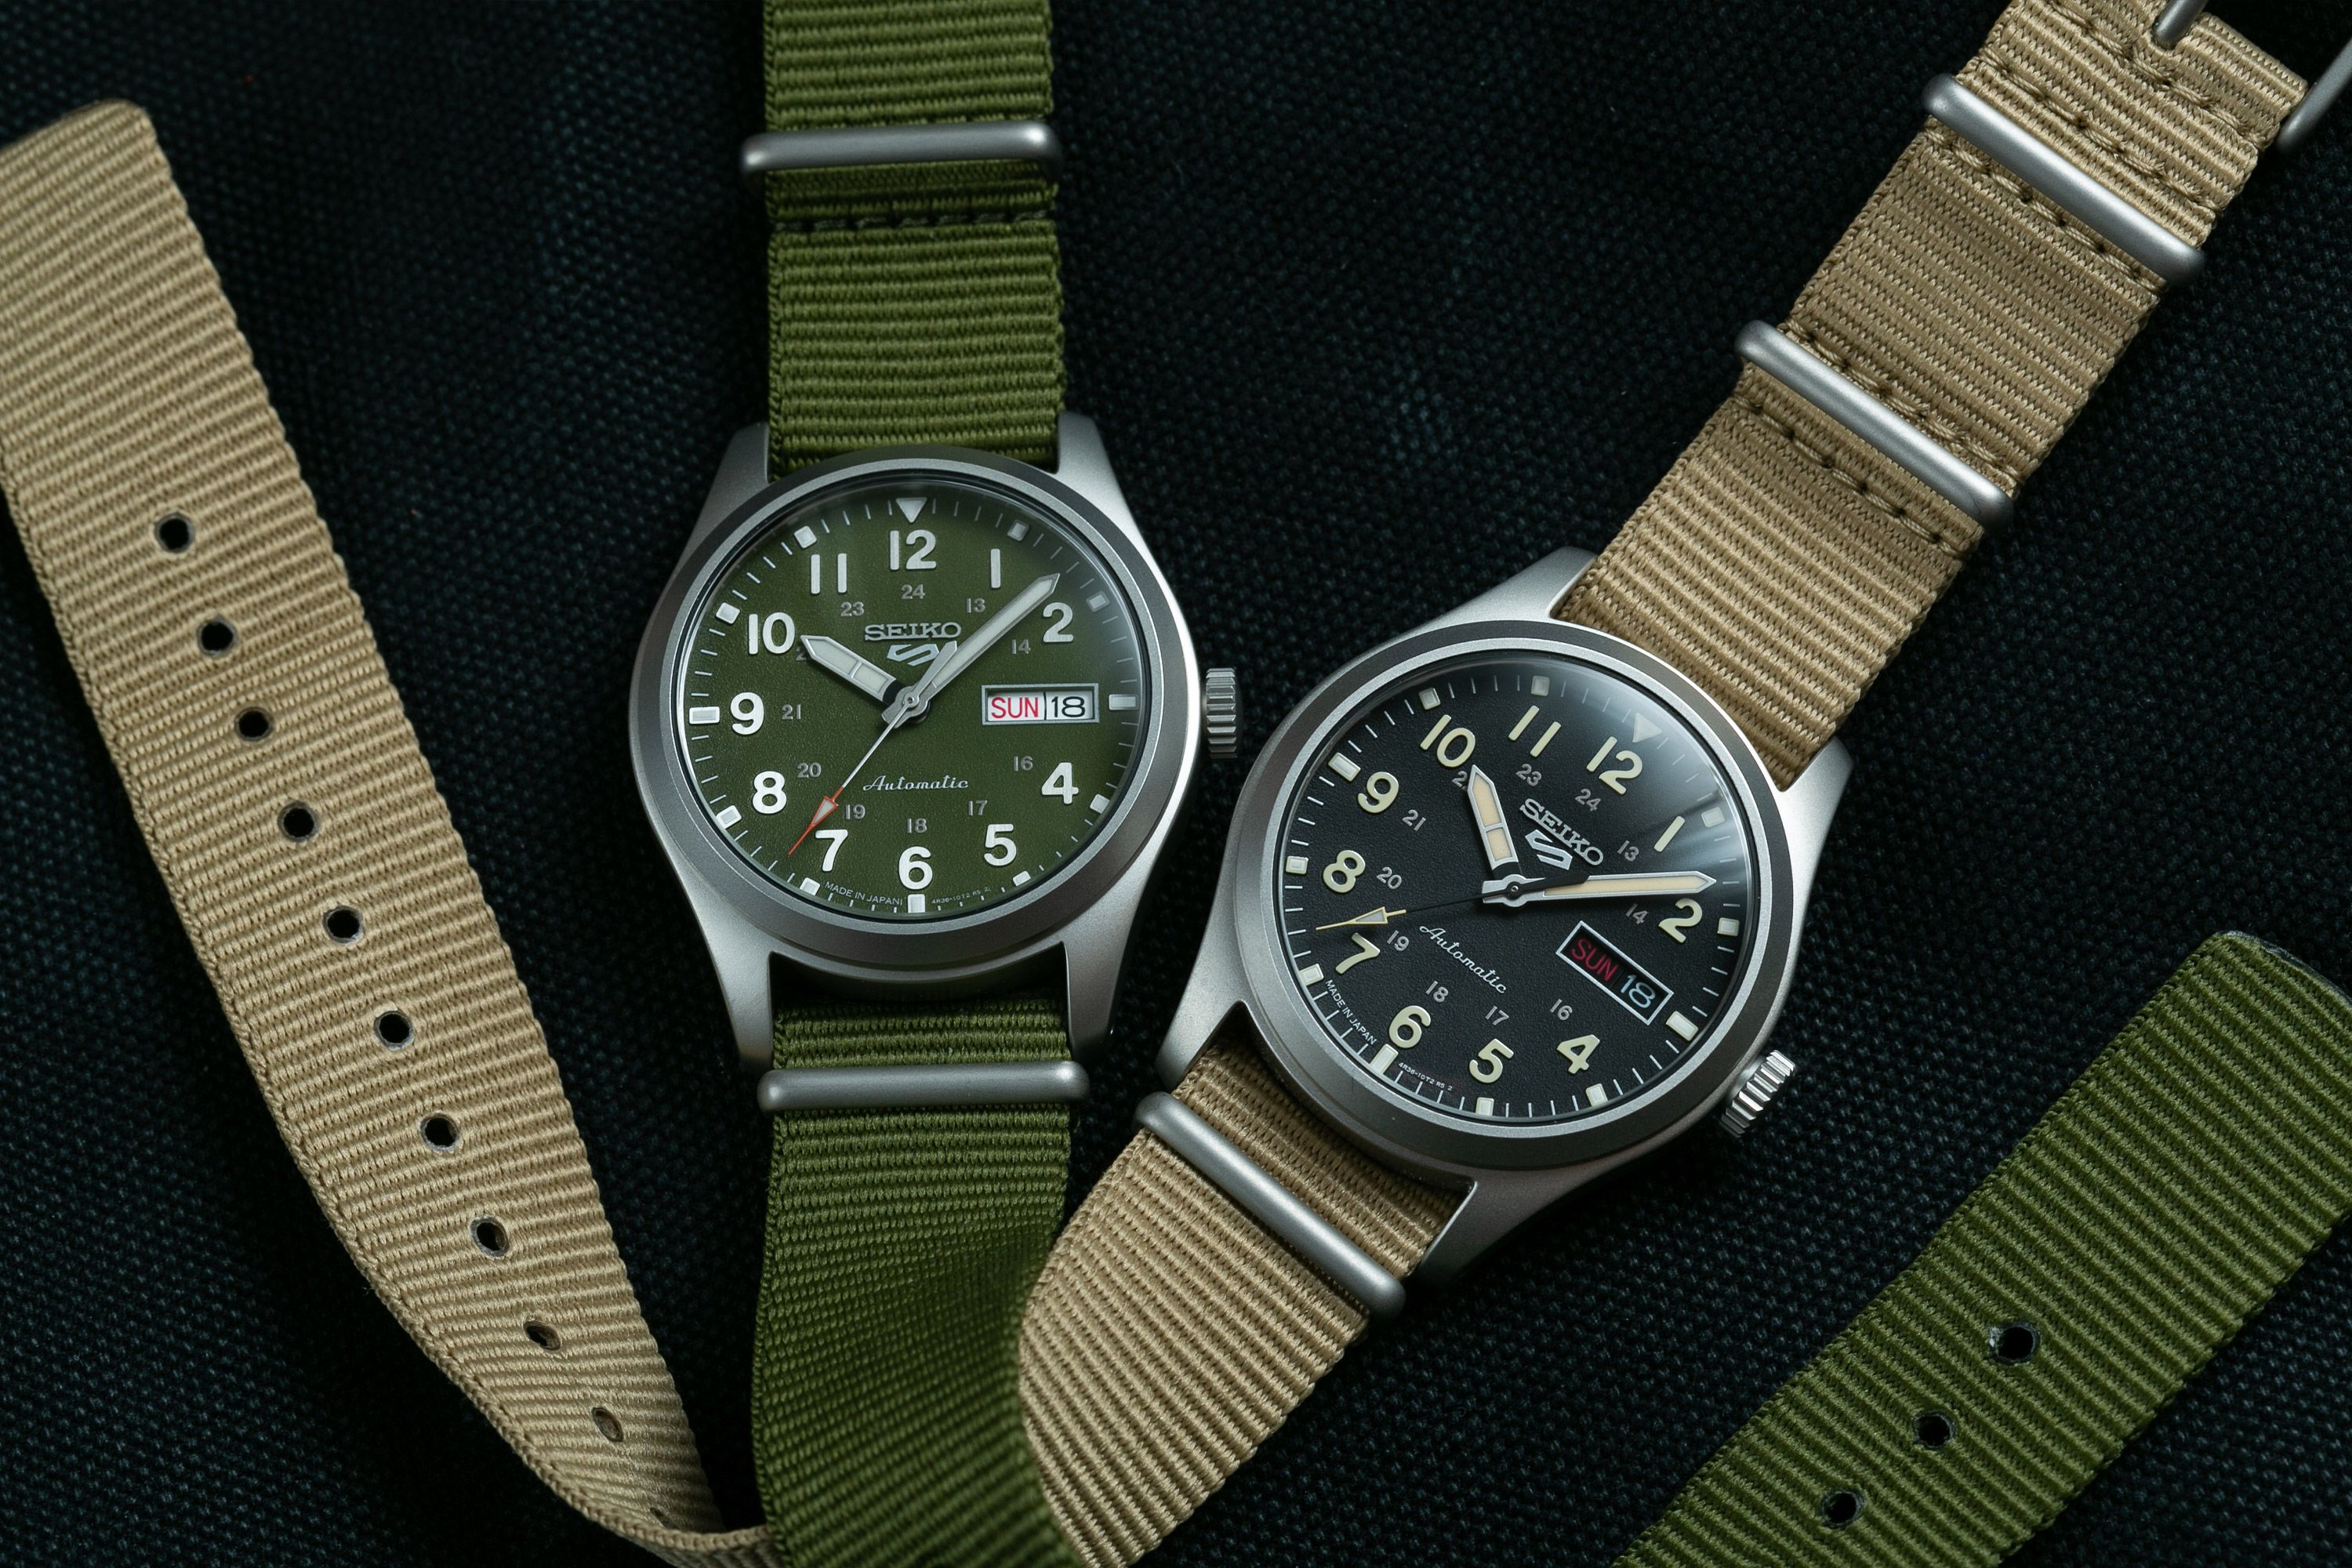 Antibiotika Mount Bank Steward Seiko 5 Sports Field Watch Review: Can It Live Up to Its Lineage?